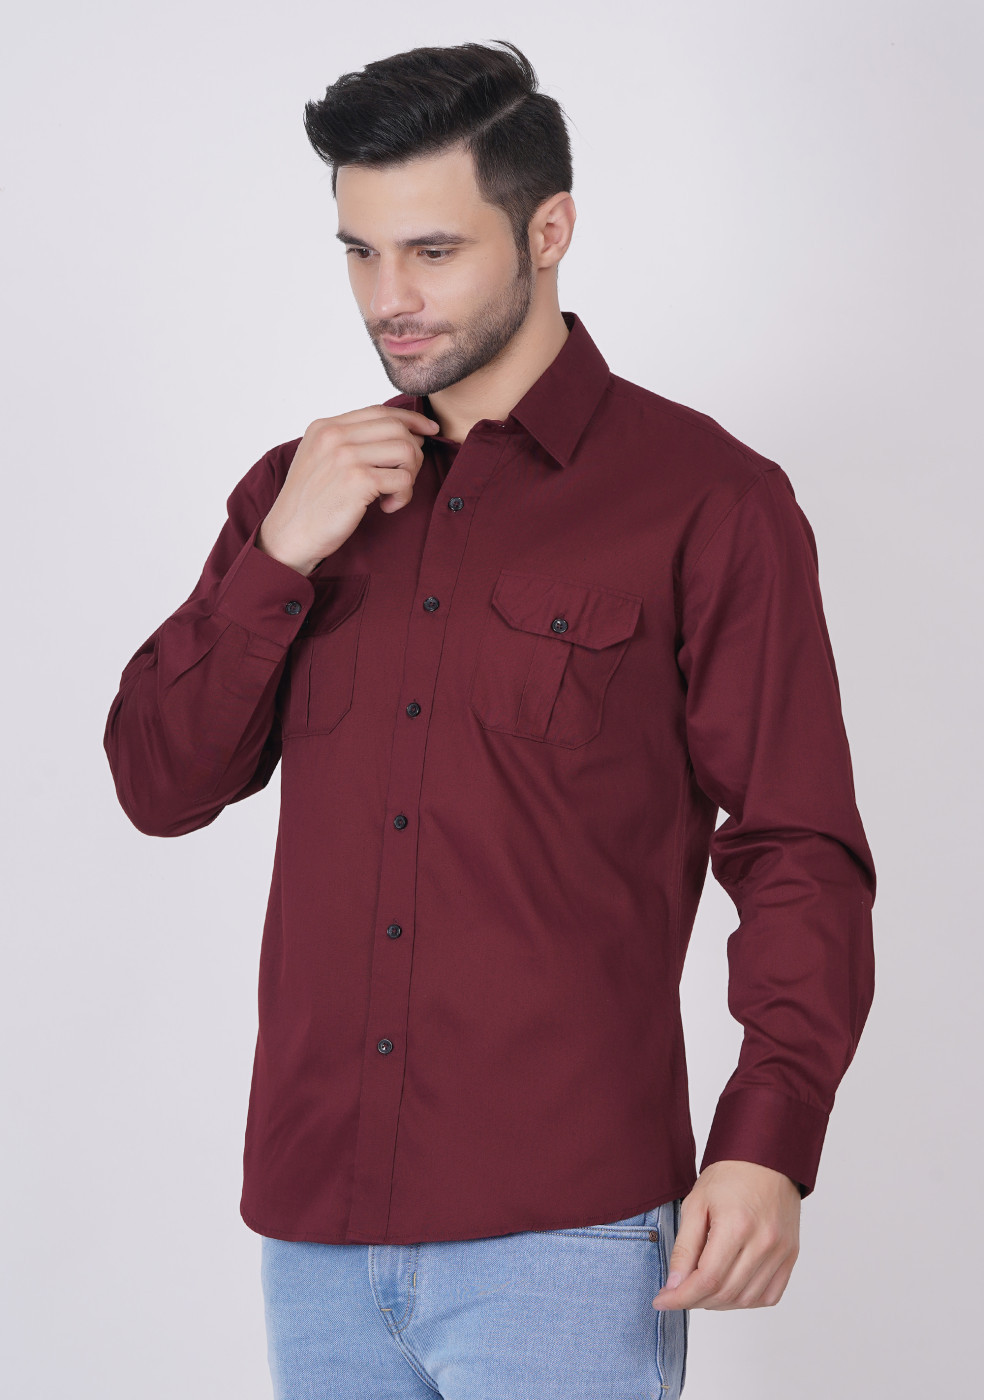 CASUAL SHIRT DOUBLE POCKET (PACK OF 2)